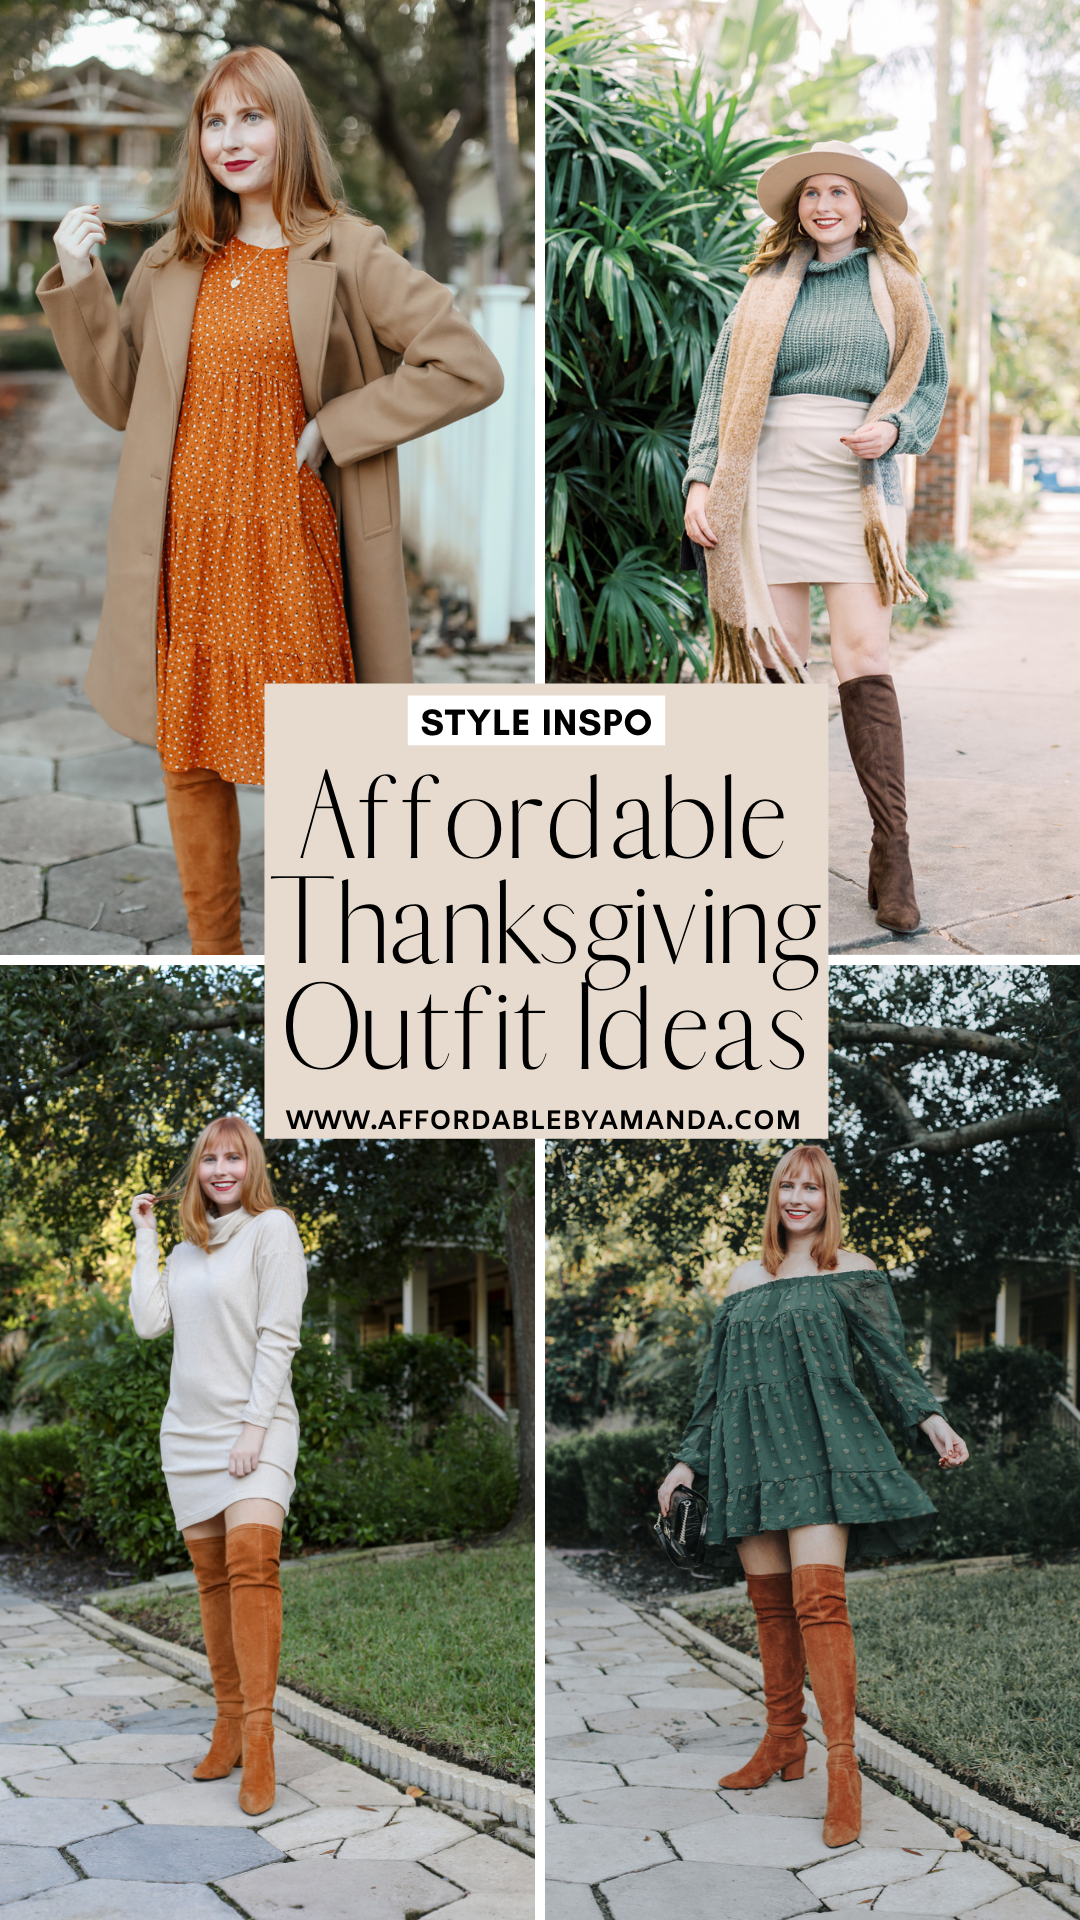 Affordable Thanksgiving Outfit Ideas - Affordable by Amanda - What To Wear for Thanksgiving 2020